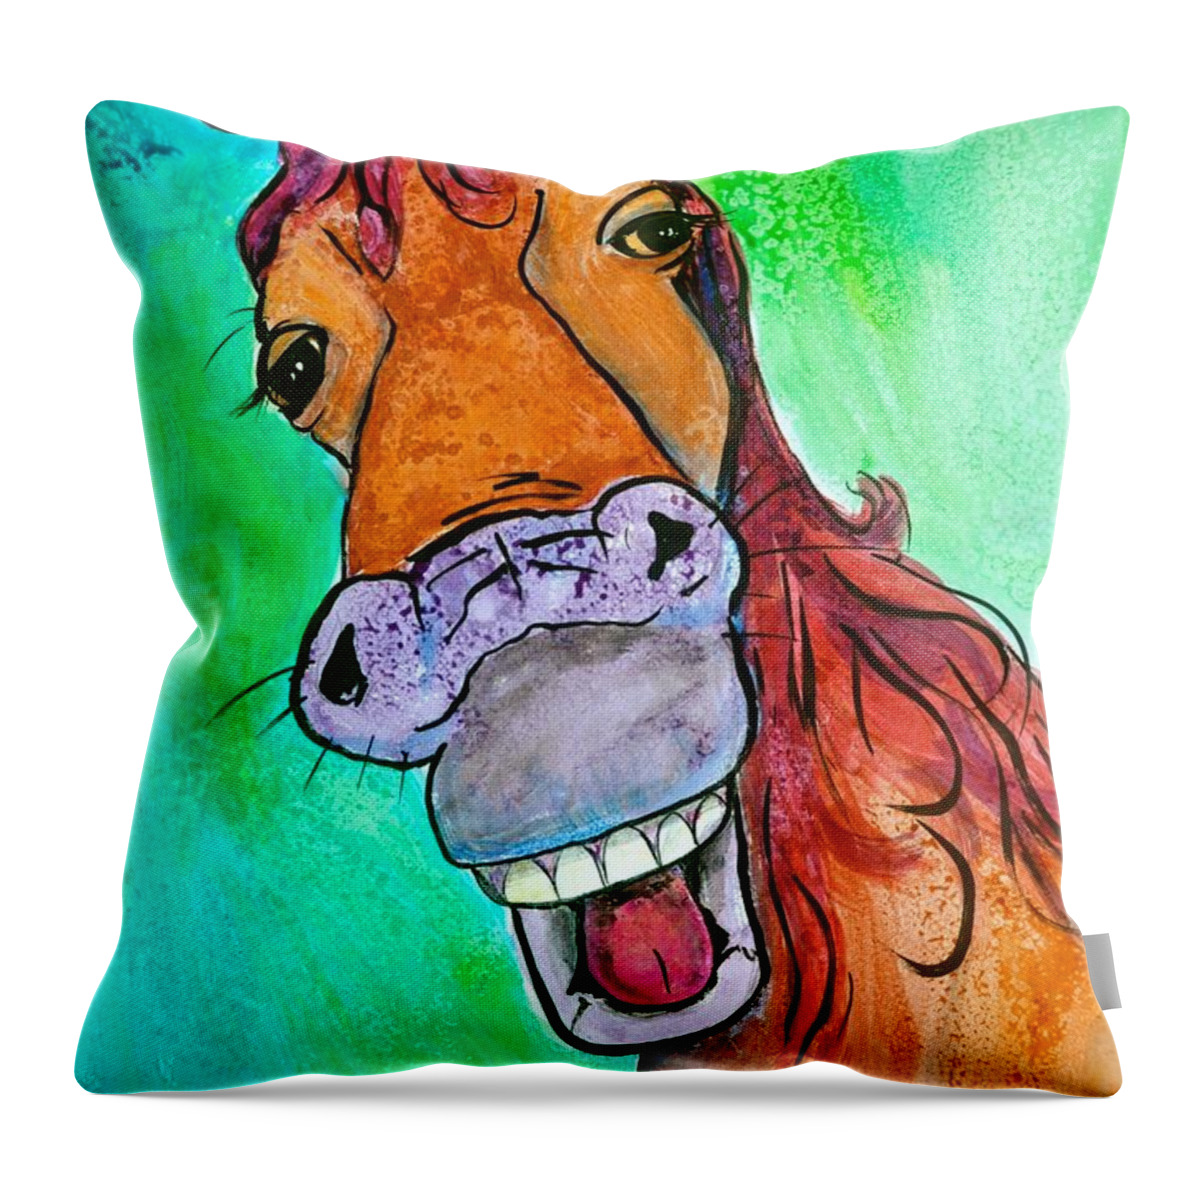 Gossip Throw Pillow featuring the painting Gossip by Debi Starr